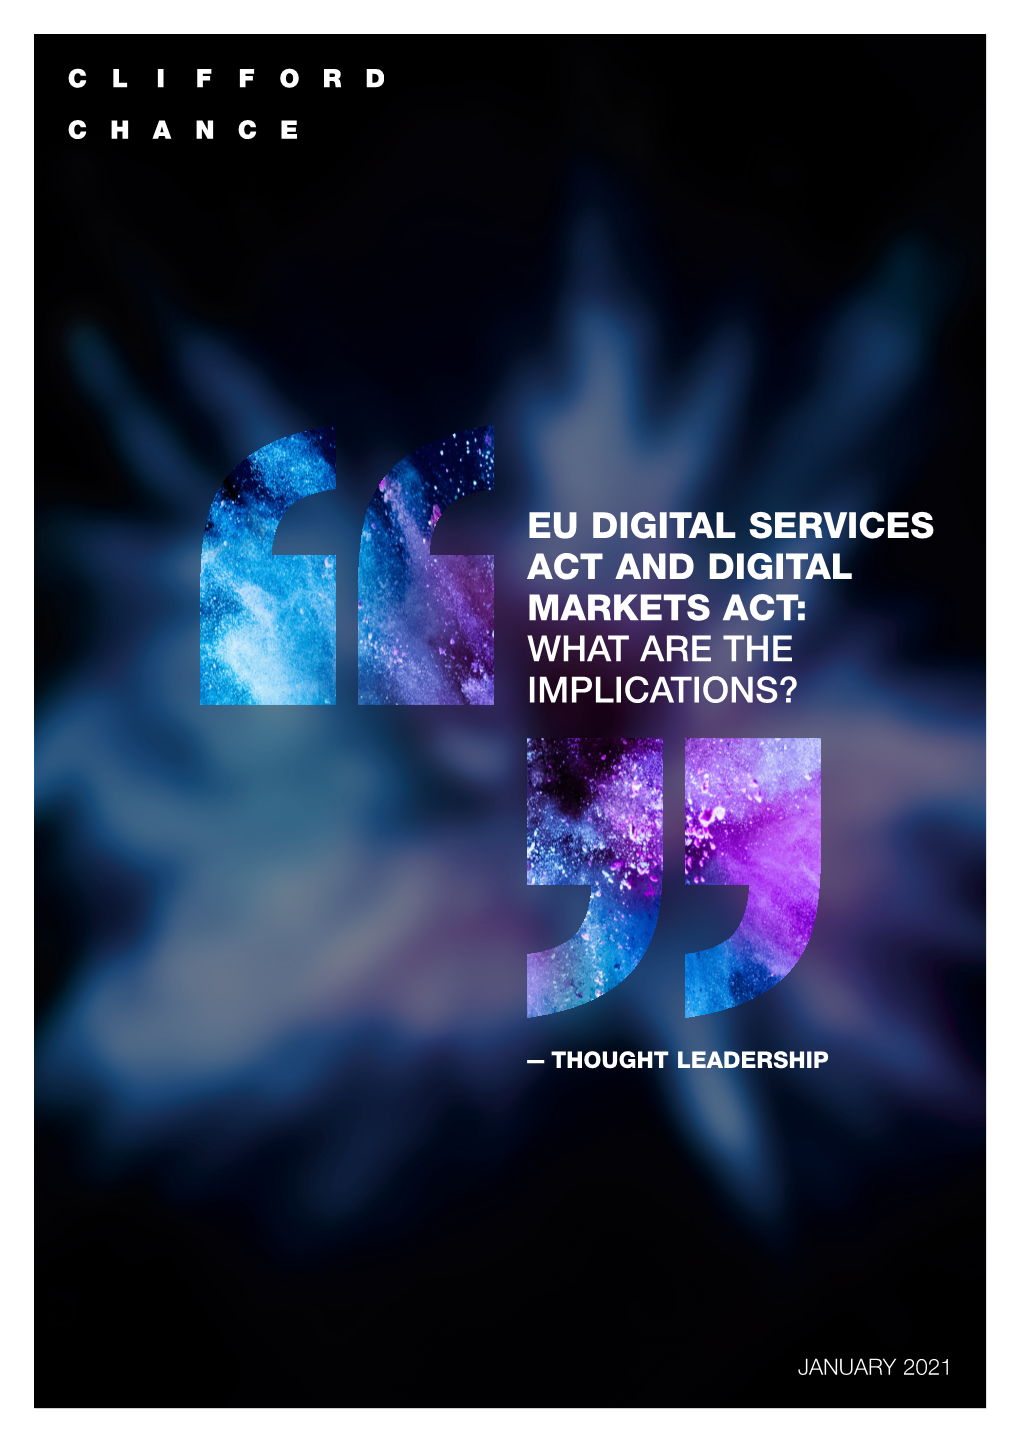 Eu Digital Services Act and Digital Markets Act: What Are the Implications?